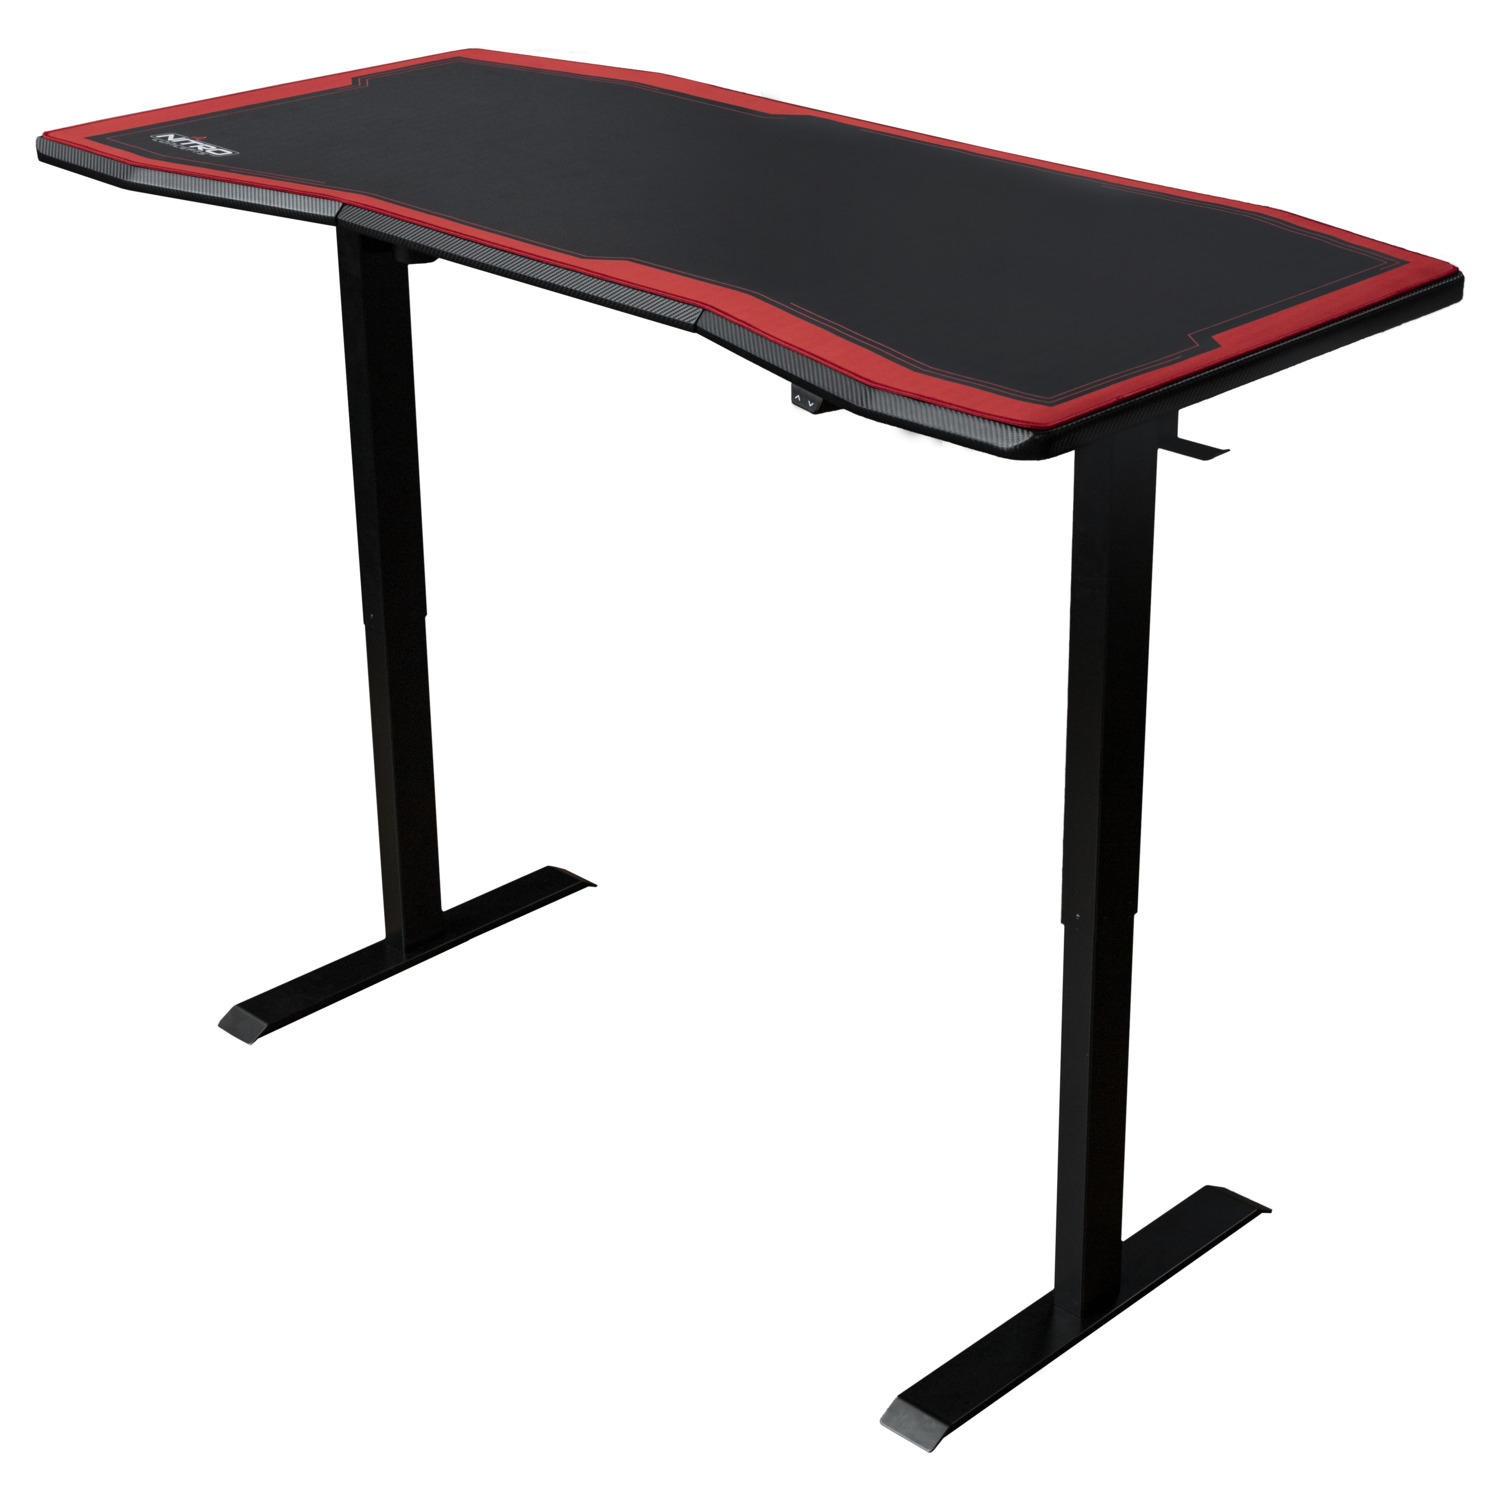 Gaming Desk D16E Carbon Red - electrically adjustable height